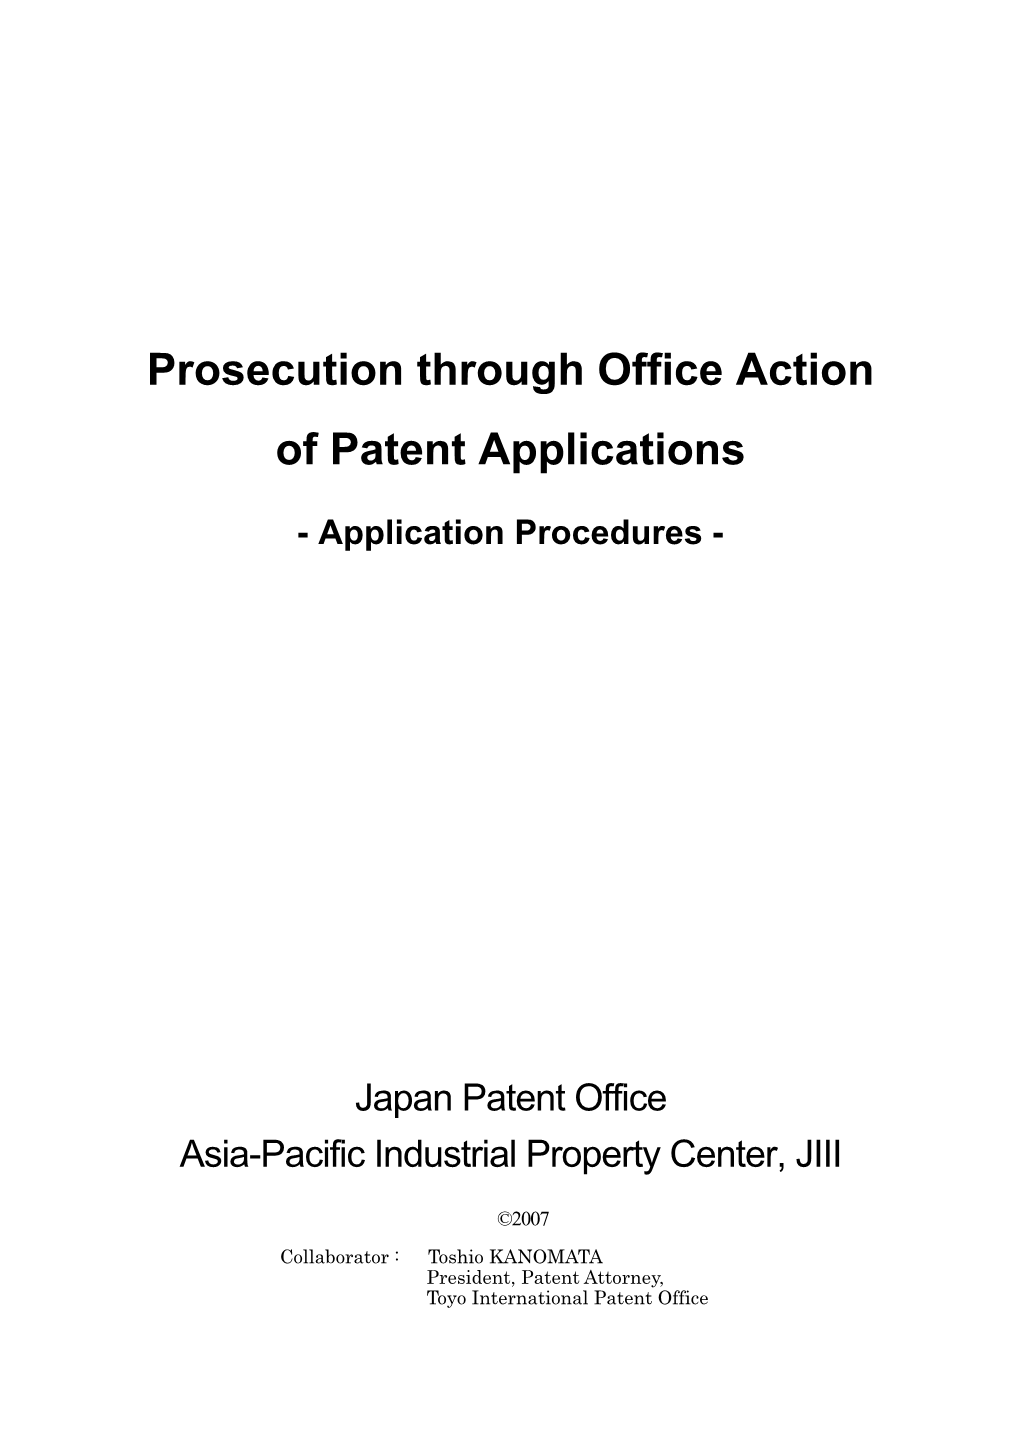 Prosecution Through Office Action of Patent Applications